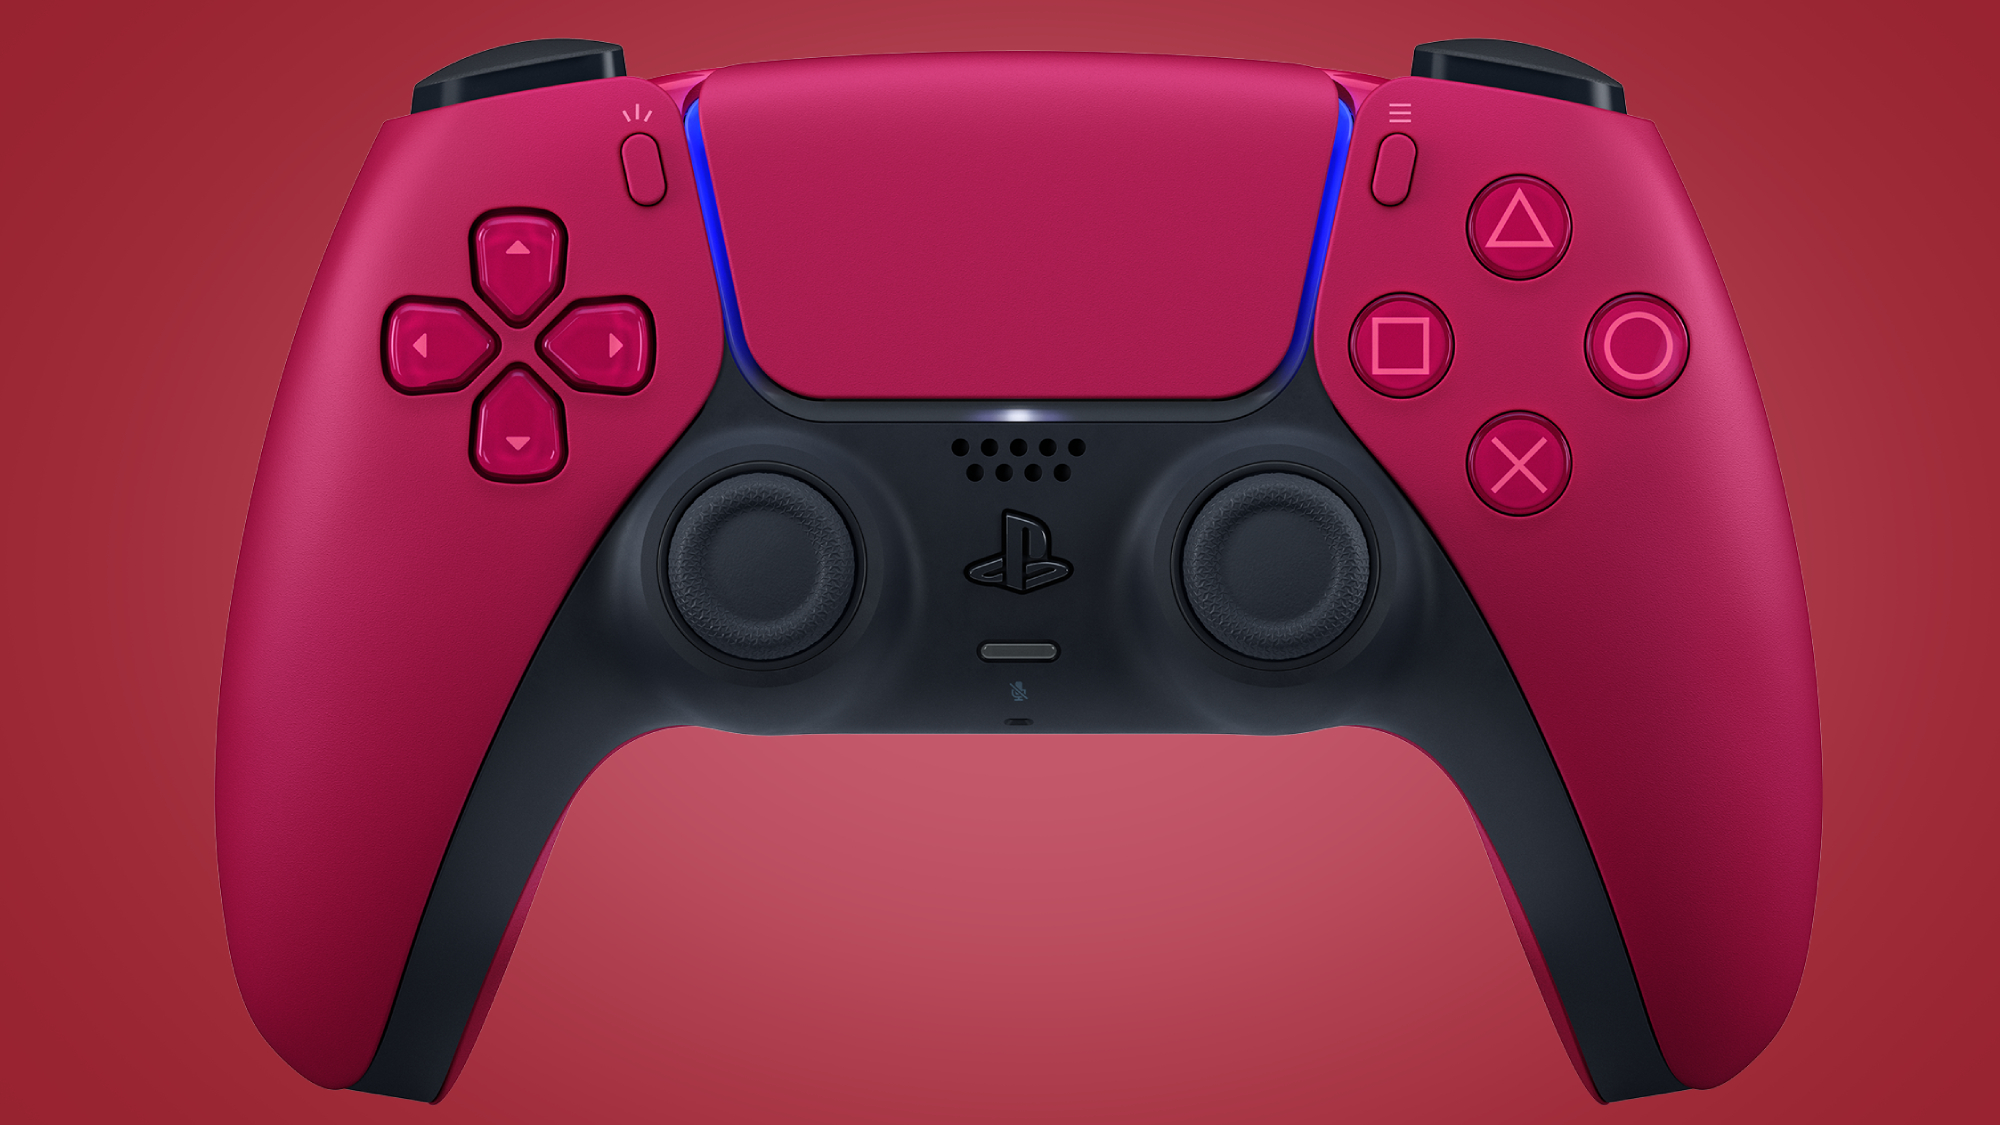 The First Ever Third-Party PS5 Controller Has Been Announced - IGN